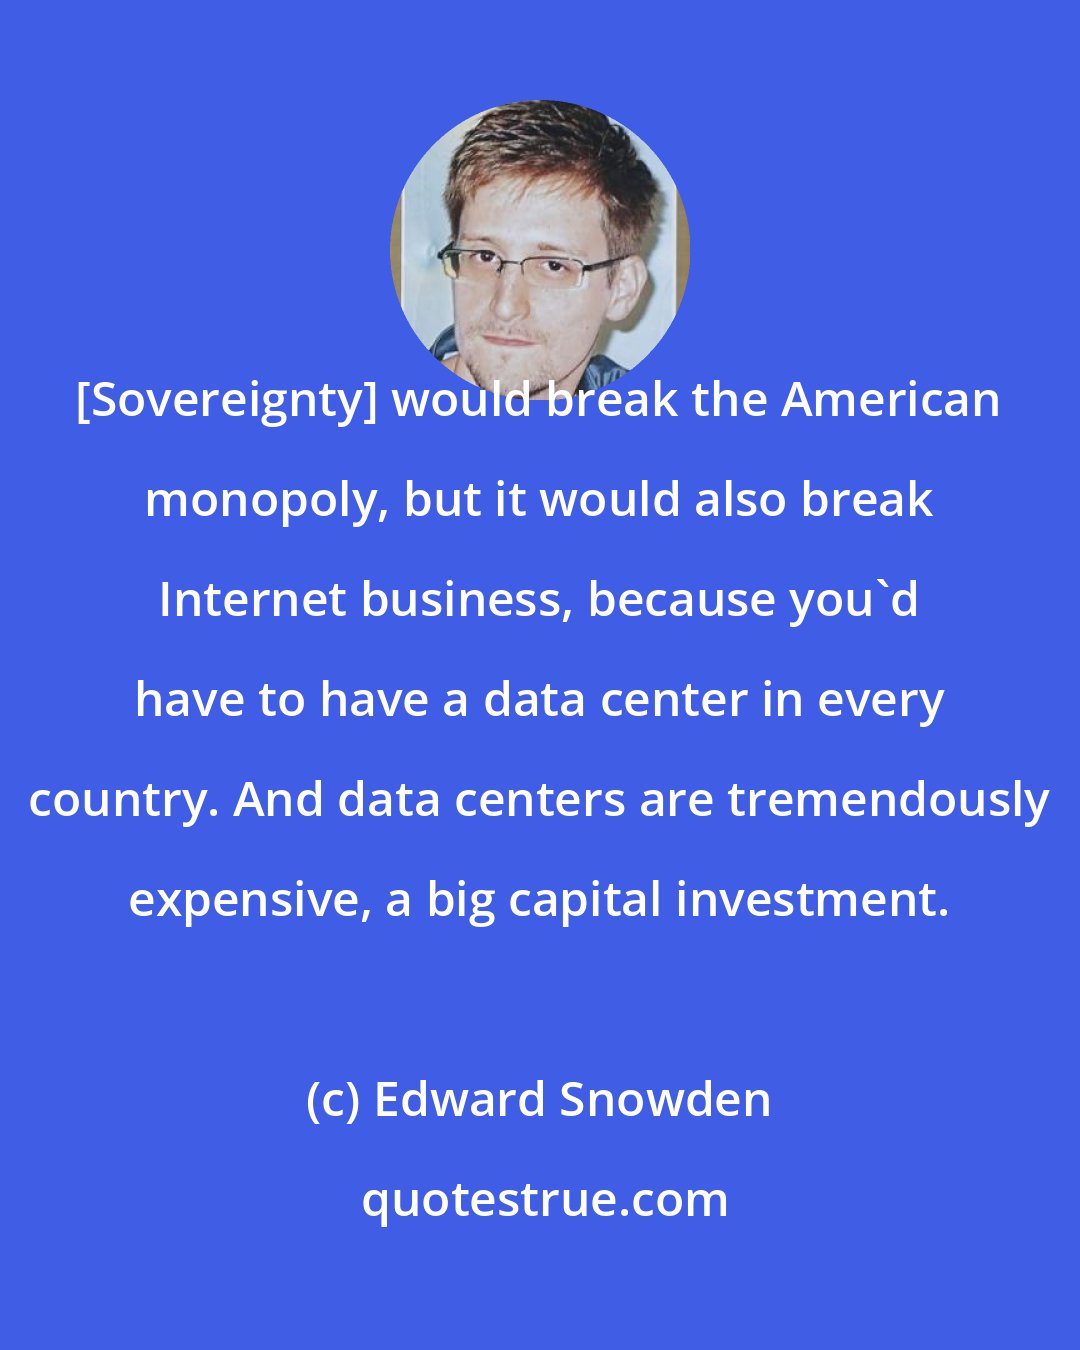 Edward Snowden: [Sovereignty] would break the American monopoly, but it would also break Internet business, because you'd have to have a data center in every country. And data centers are tremendously expensive, a big capital investment.